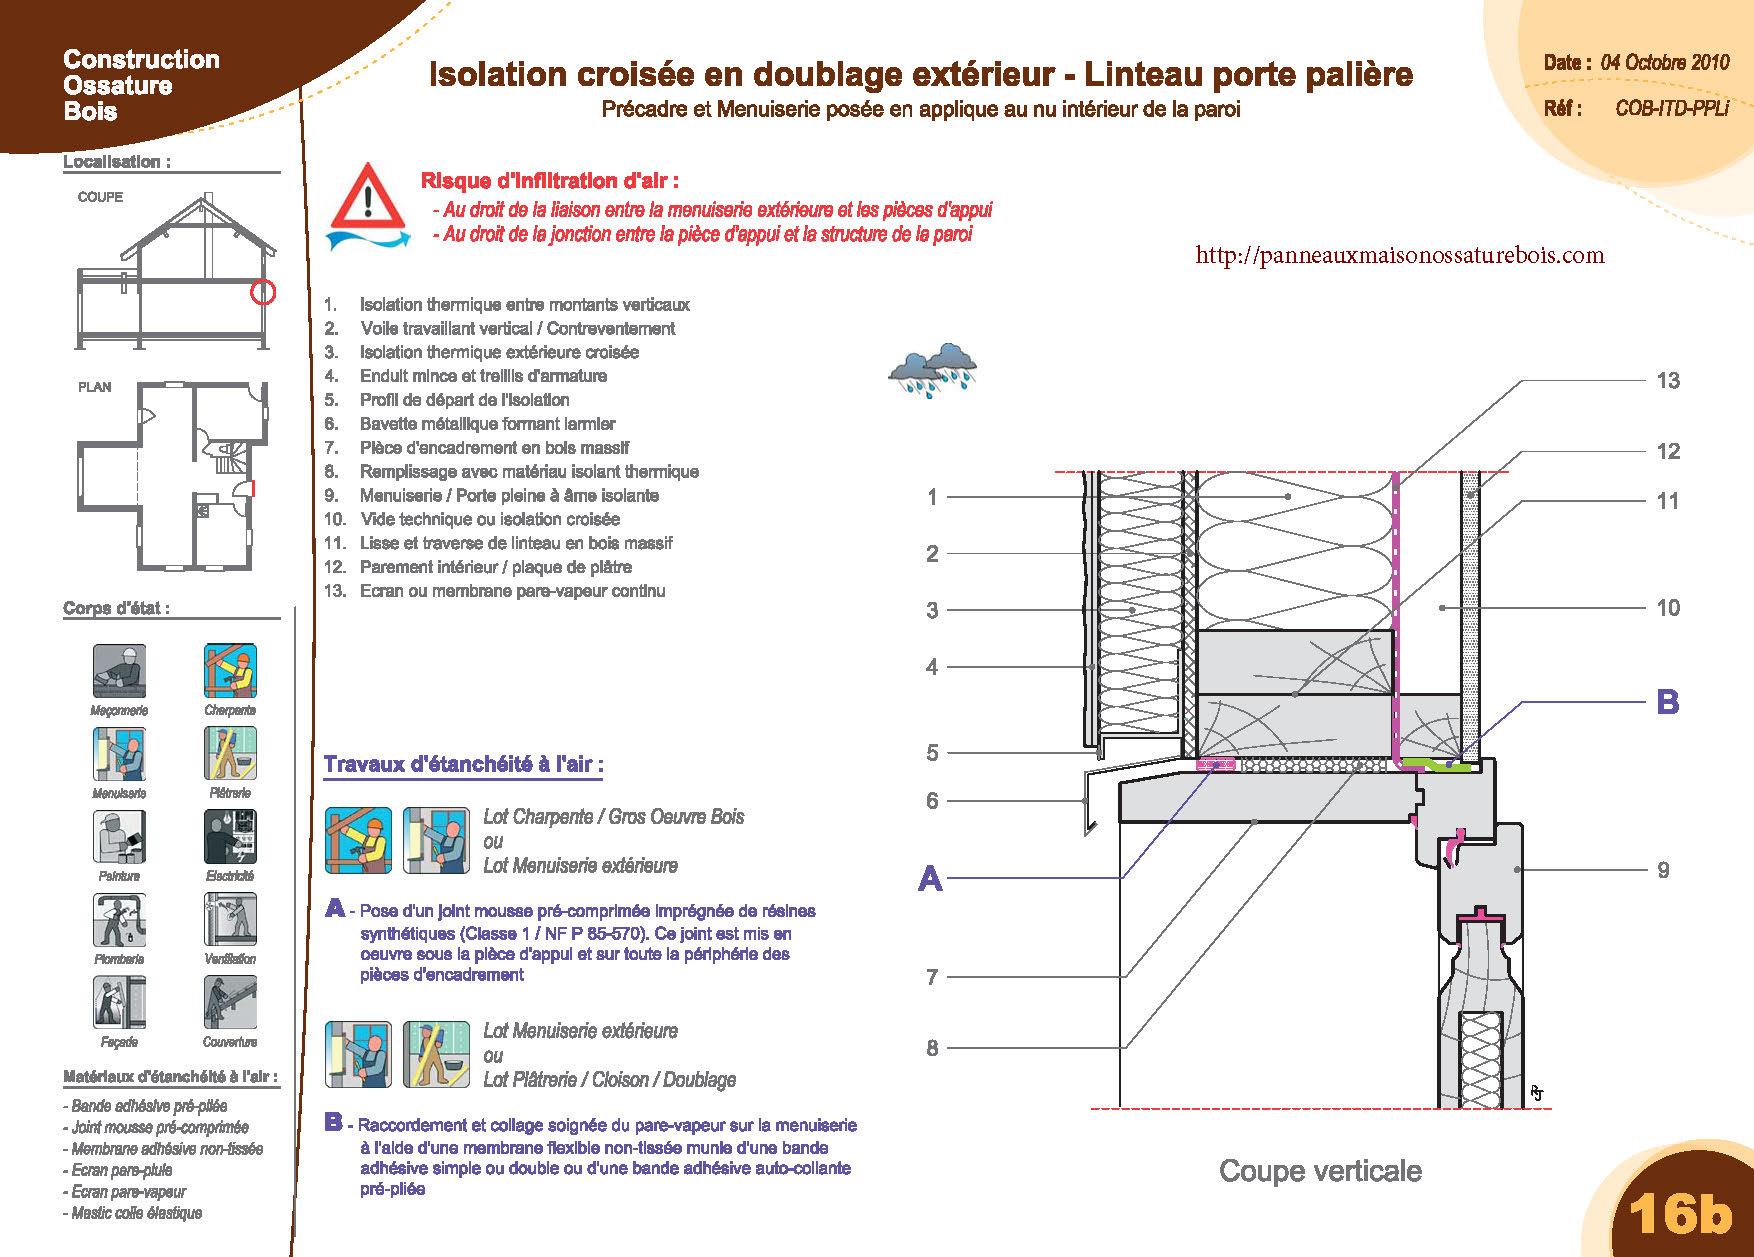 coupes construtions ossature bois complets_Page_53